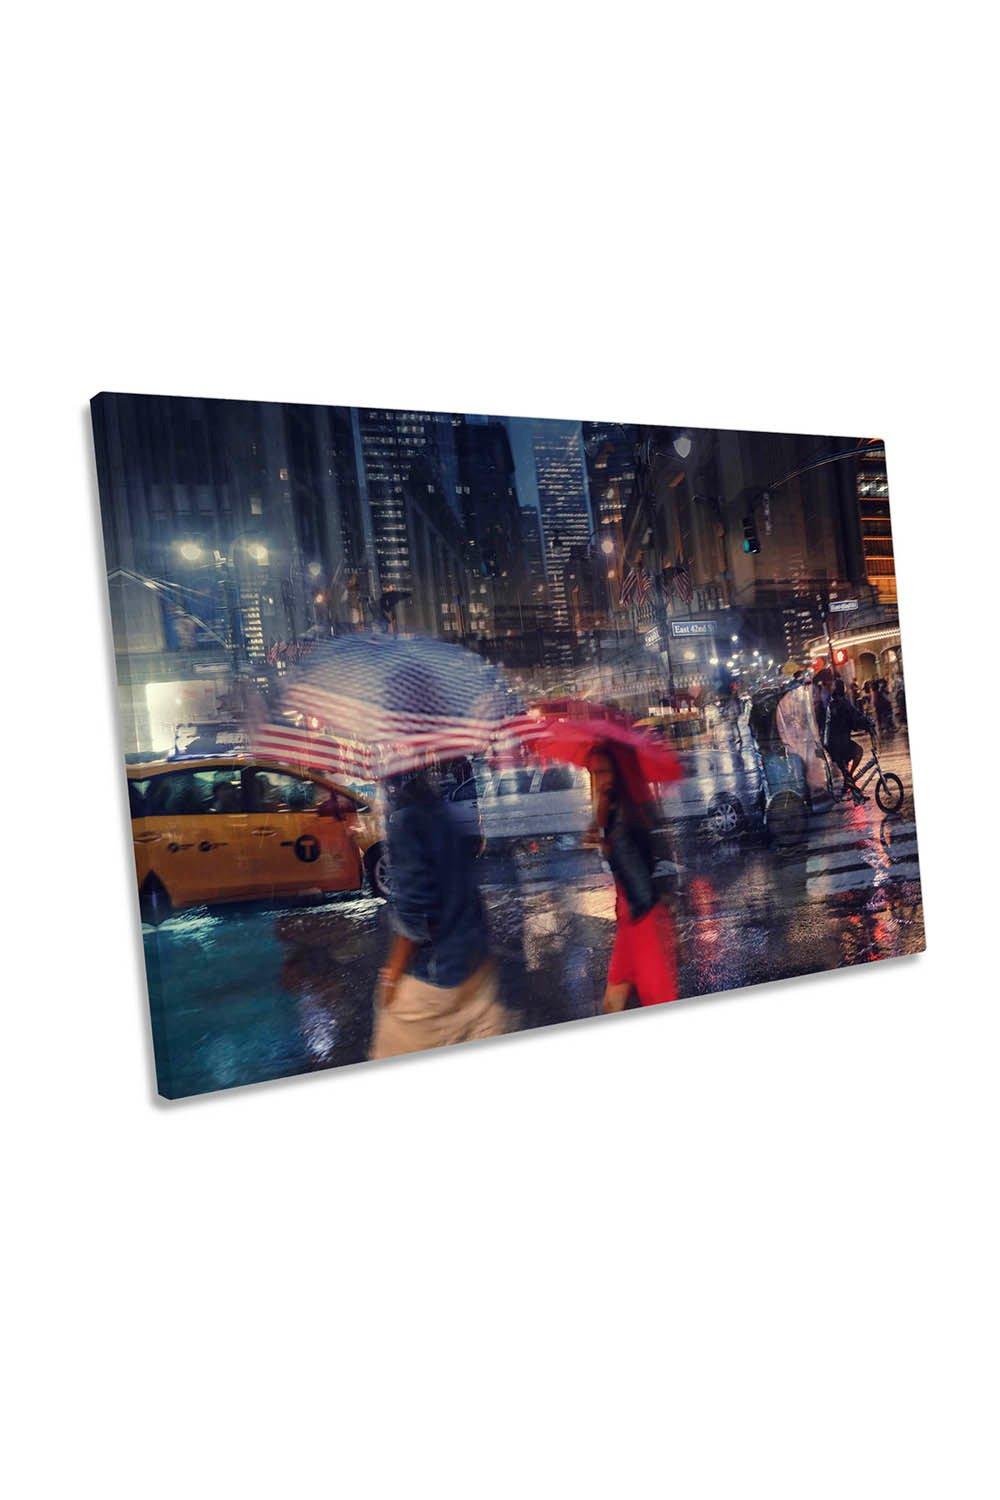 New York City Umbrella Busy Streets Canvas Wall Art Picture Print